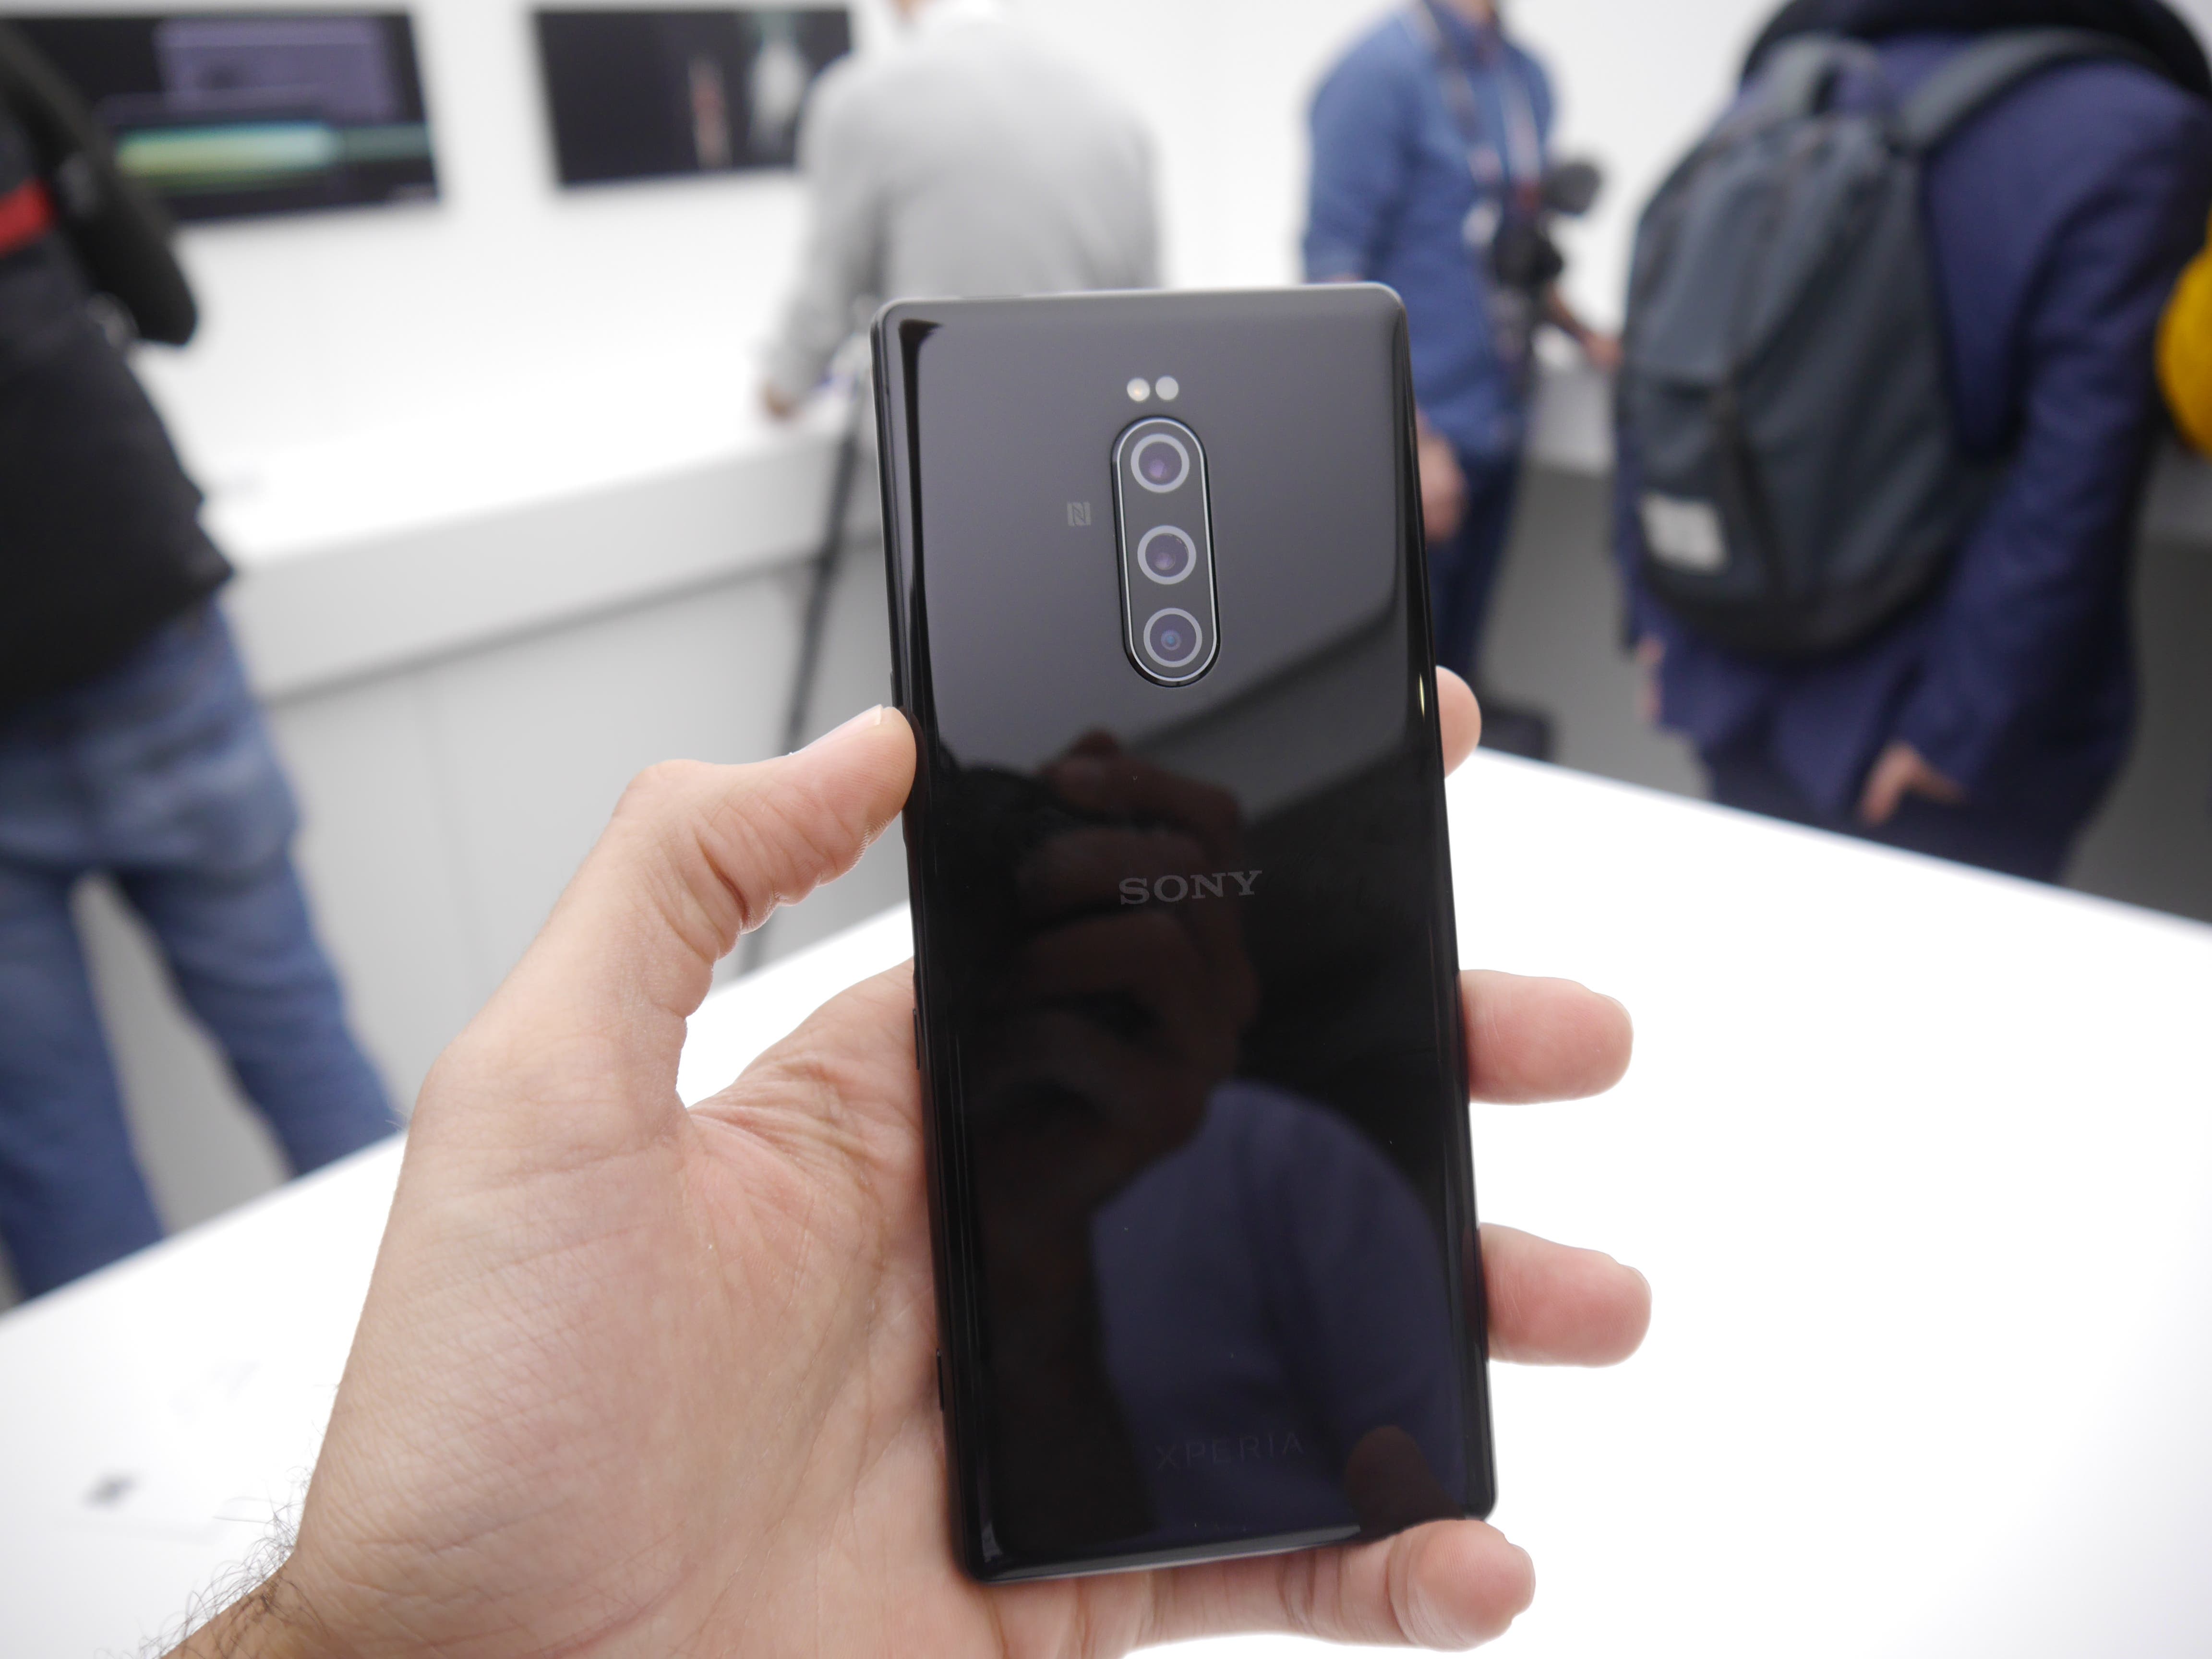 Sony Xperia 1 hands-on